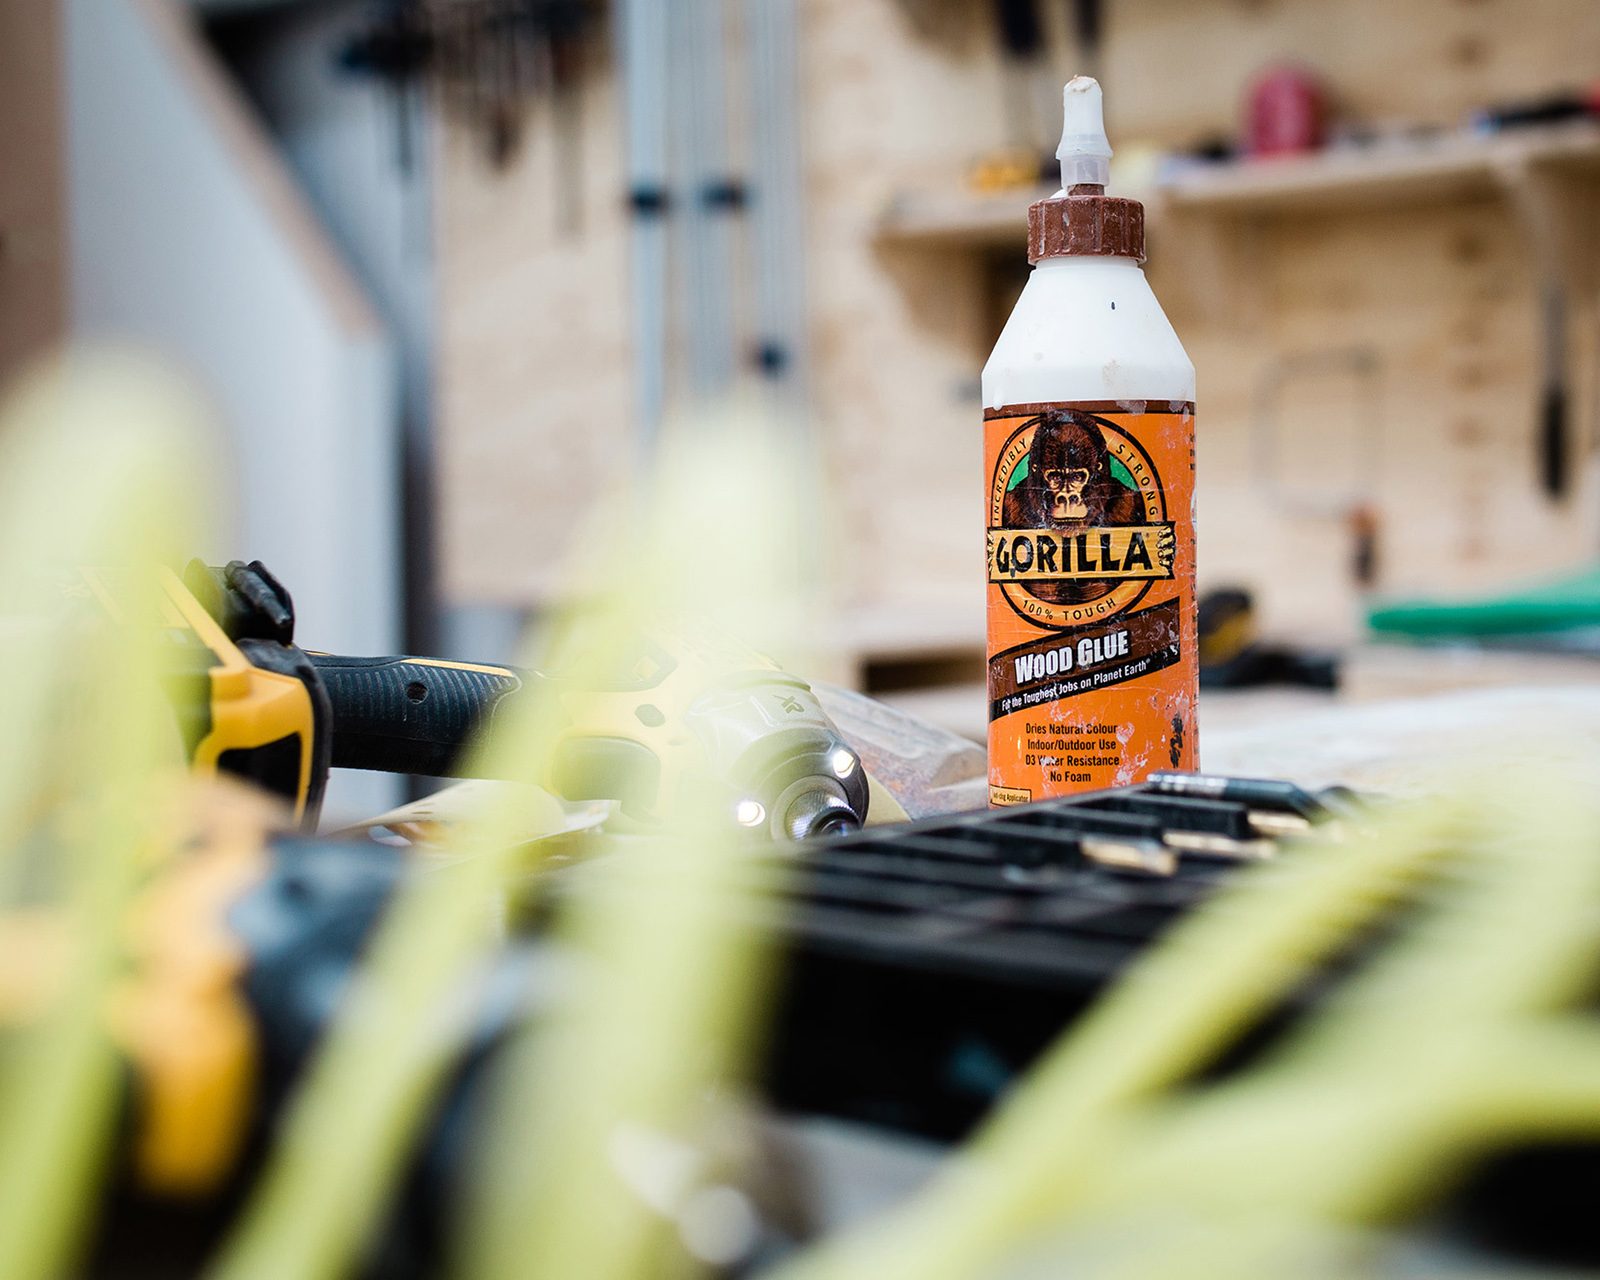 A bottle of gorilla wood glue on a workbench with blurred tools and wood pieces in the background in a woodworking workshop, captured for the portfolio of a Design Agency Bristol.